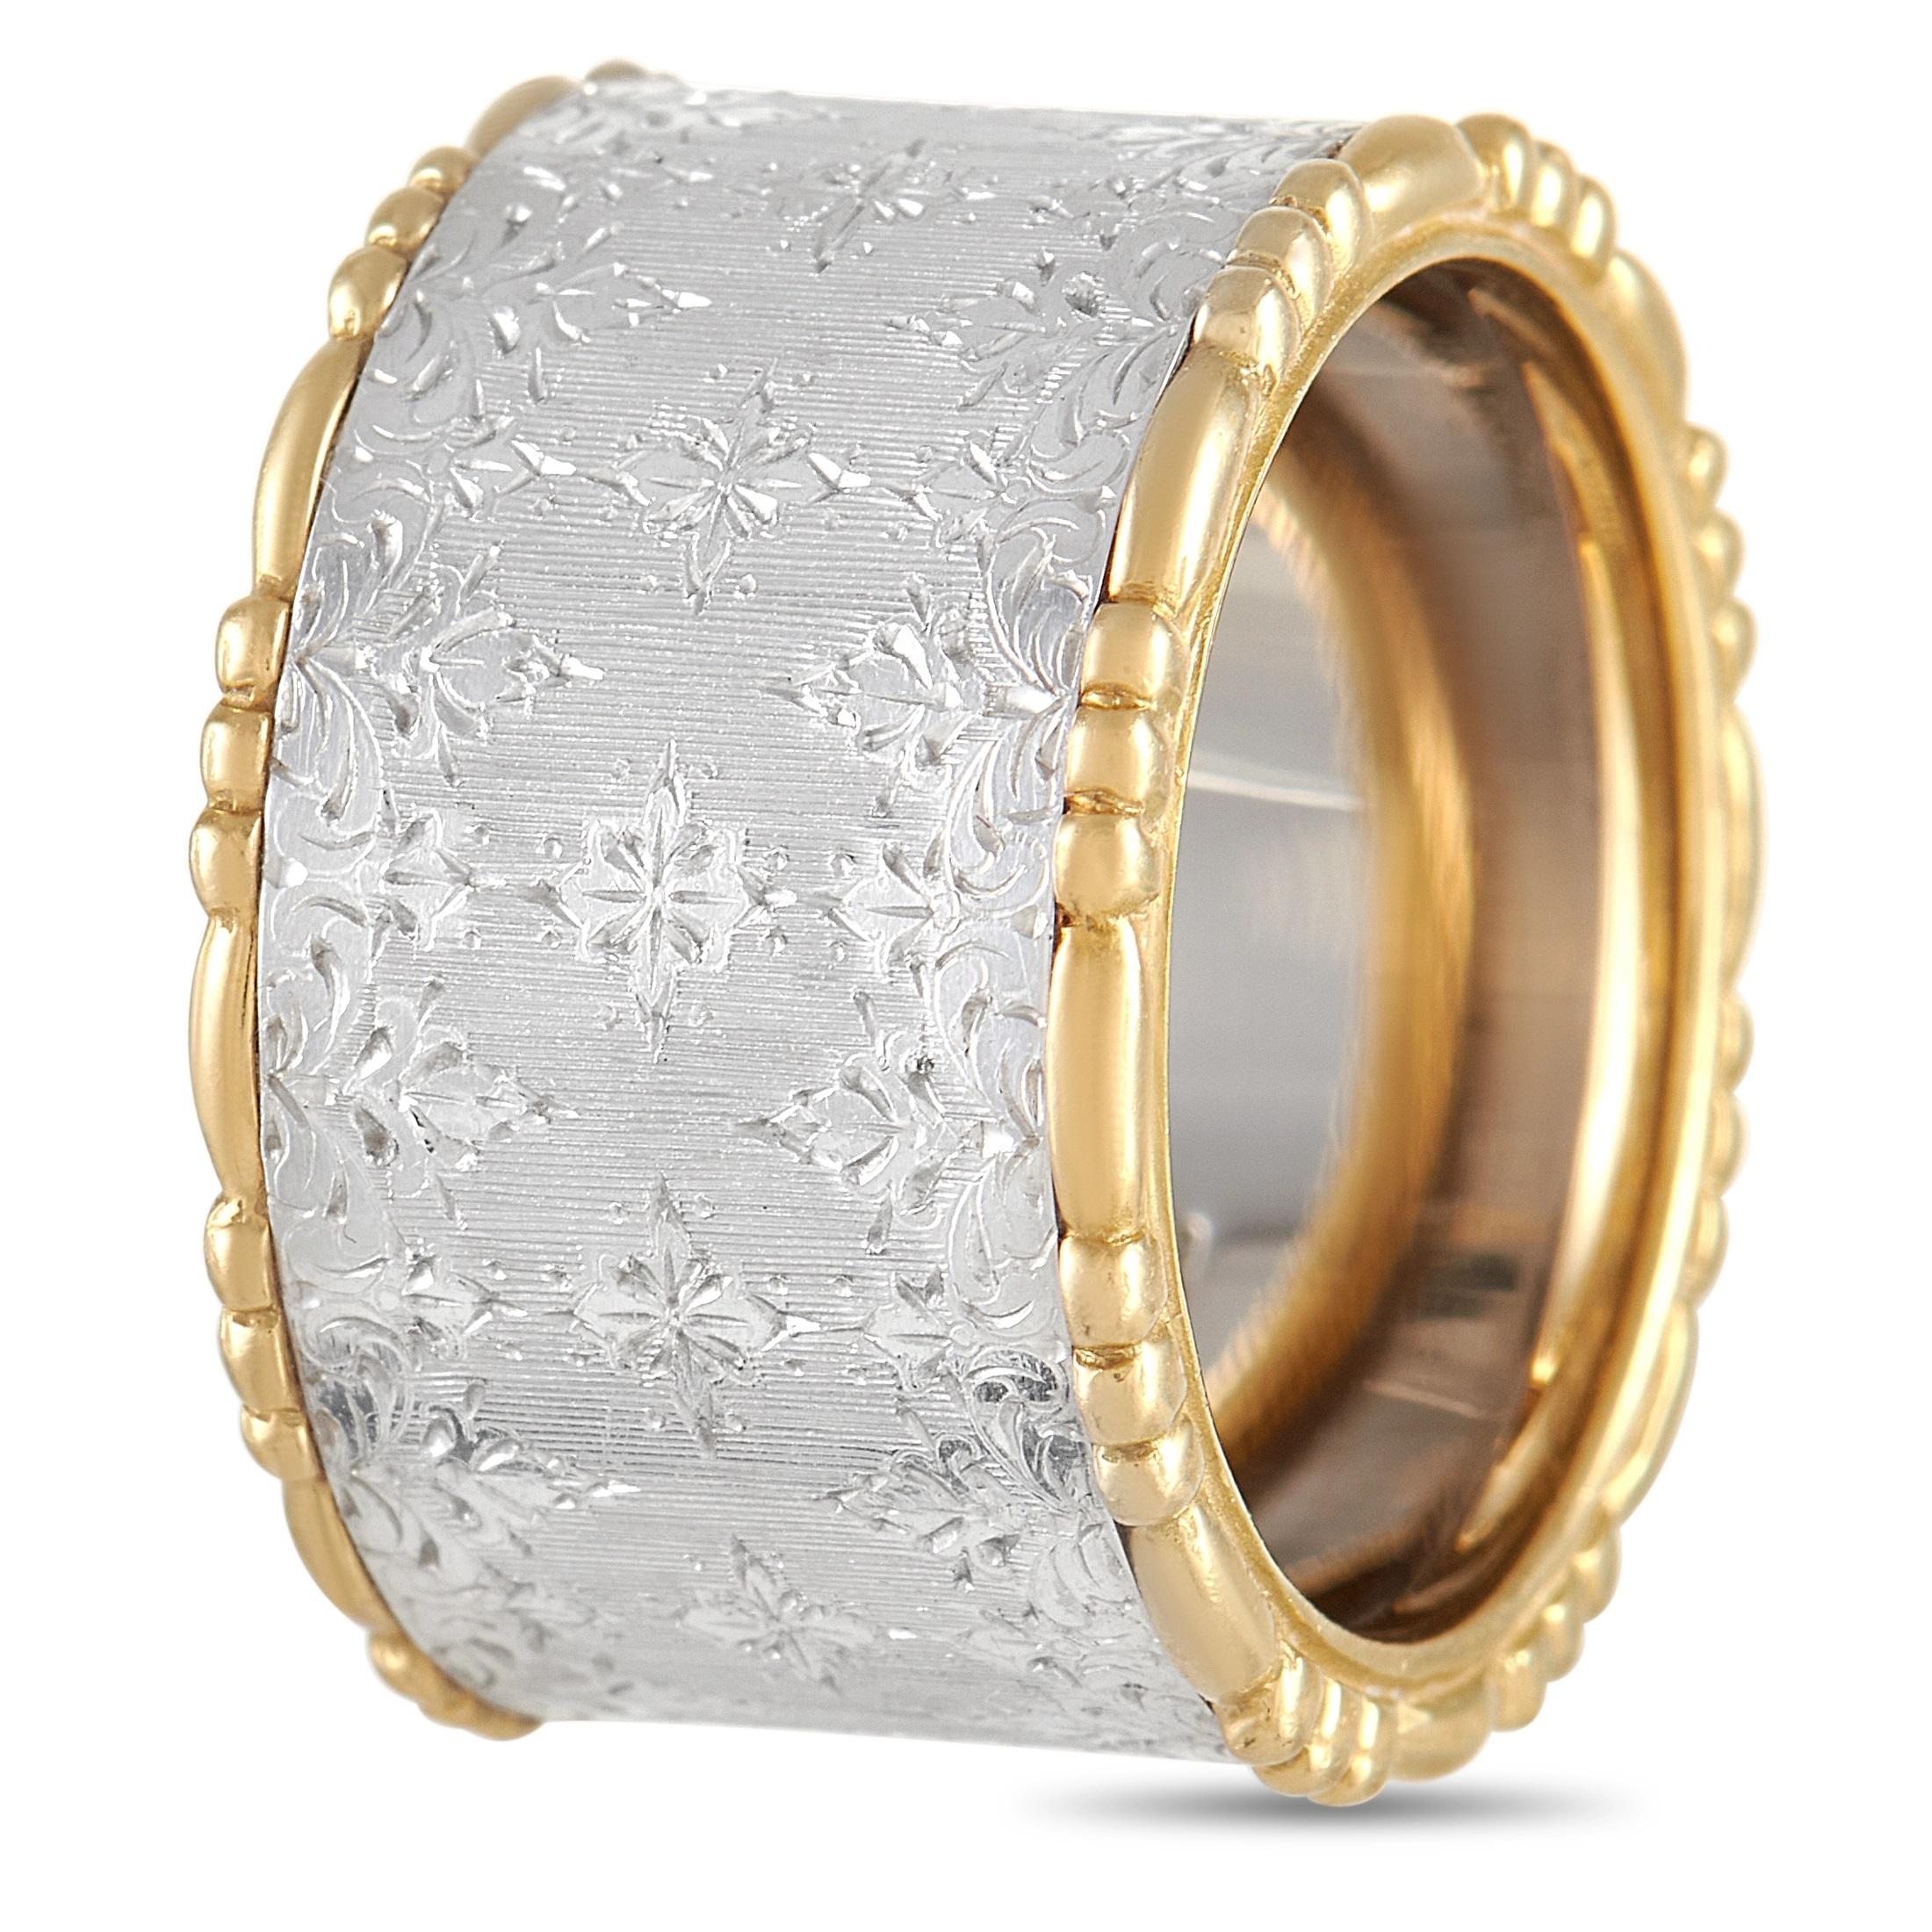 This Buccellati 18K White Gold & 18K Yellow Gold Wide Band Ring is a two-toned jewel you won't regret adding to your collection. This 11mm band features a wide white gold shank that has the 